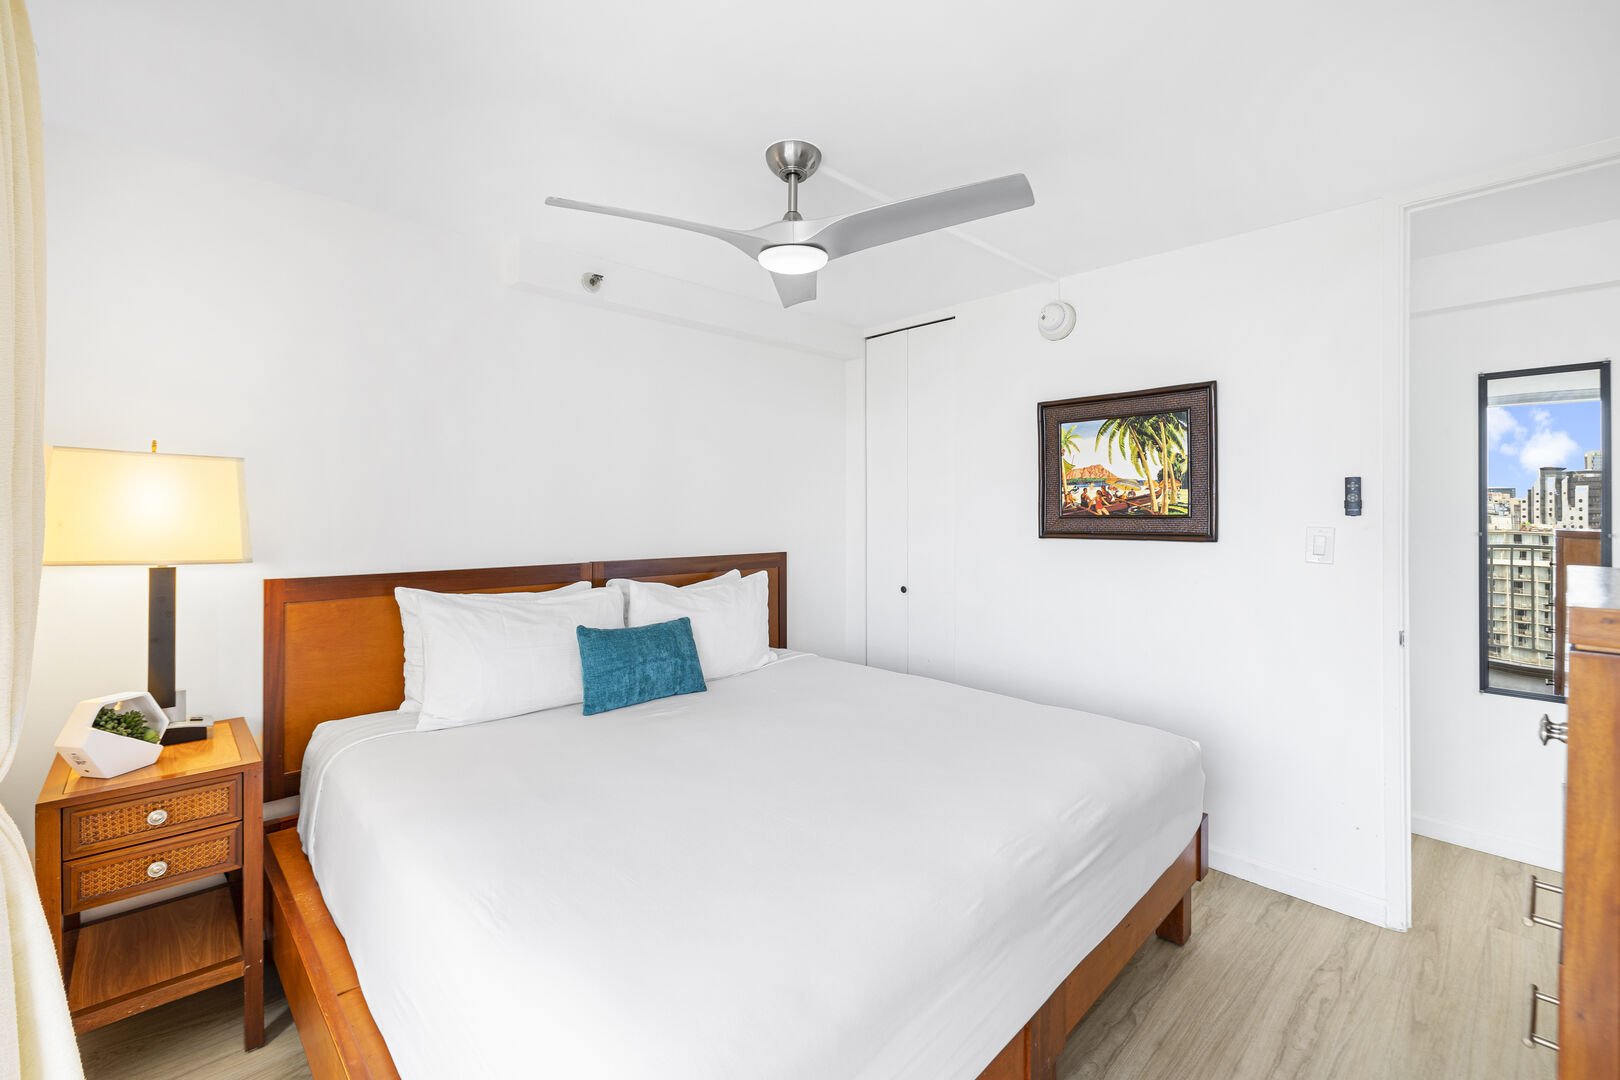 The bedroom features a king-size bed and ceiling fan for your comfort!